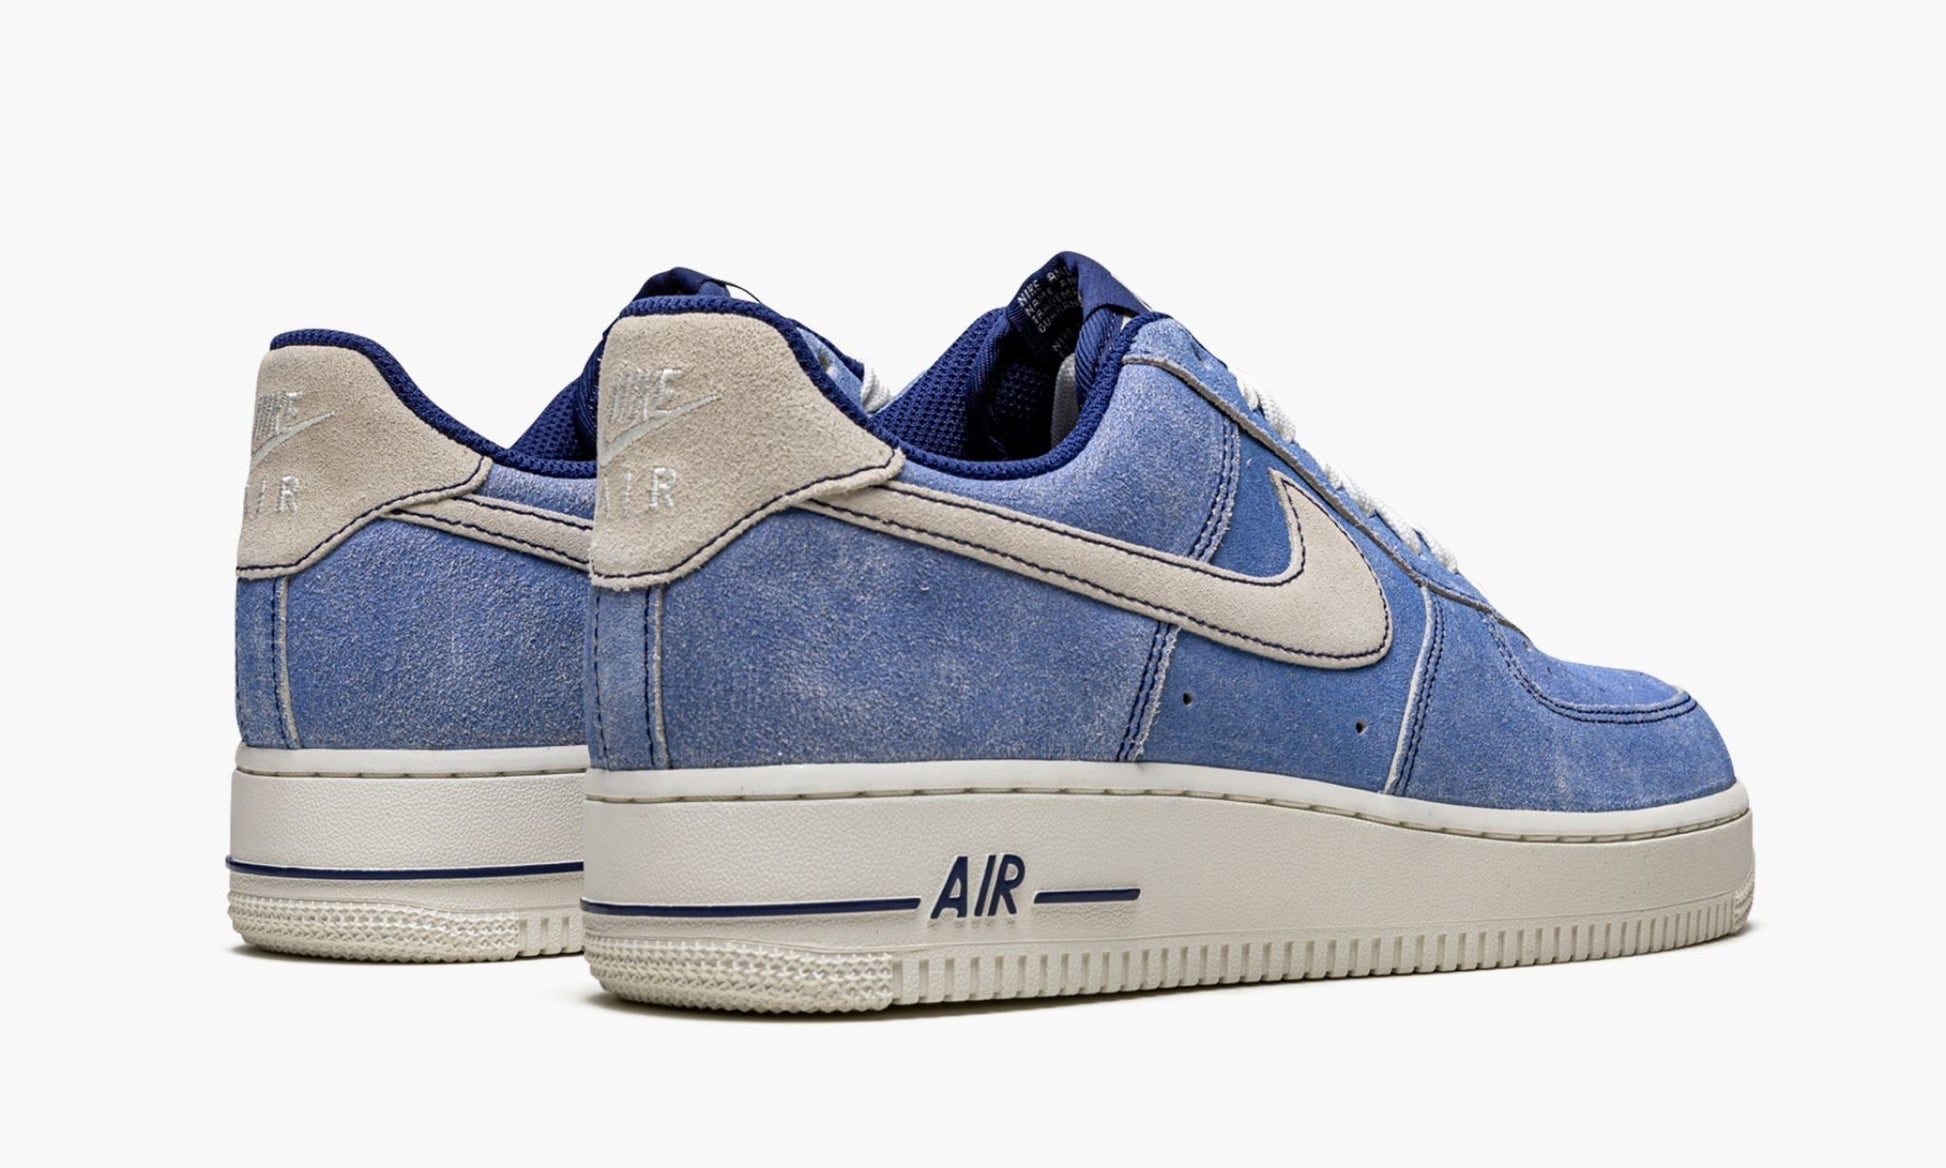 Air Force 1 Low '07 LV8 "Dusty Blue"